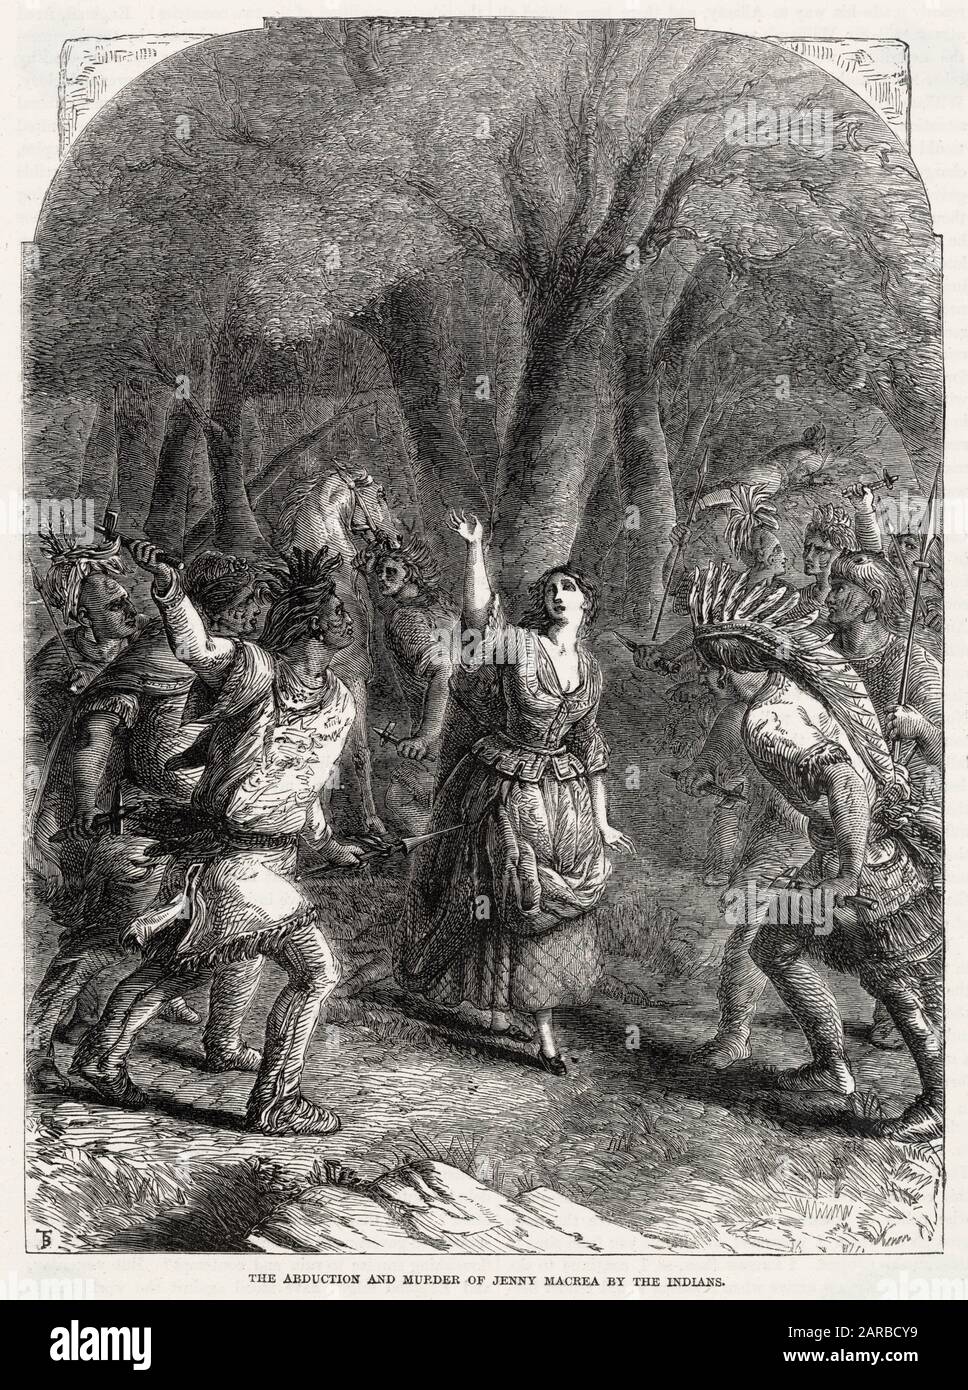 The Abduction And Murder Of Jane AKA Jenny Macrae Is Killed By Iroquois Indians During The American War of Independence     Date: 1777 Stock Photo